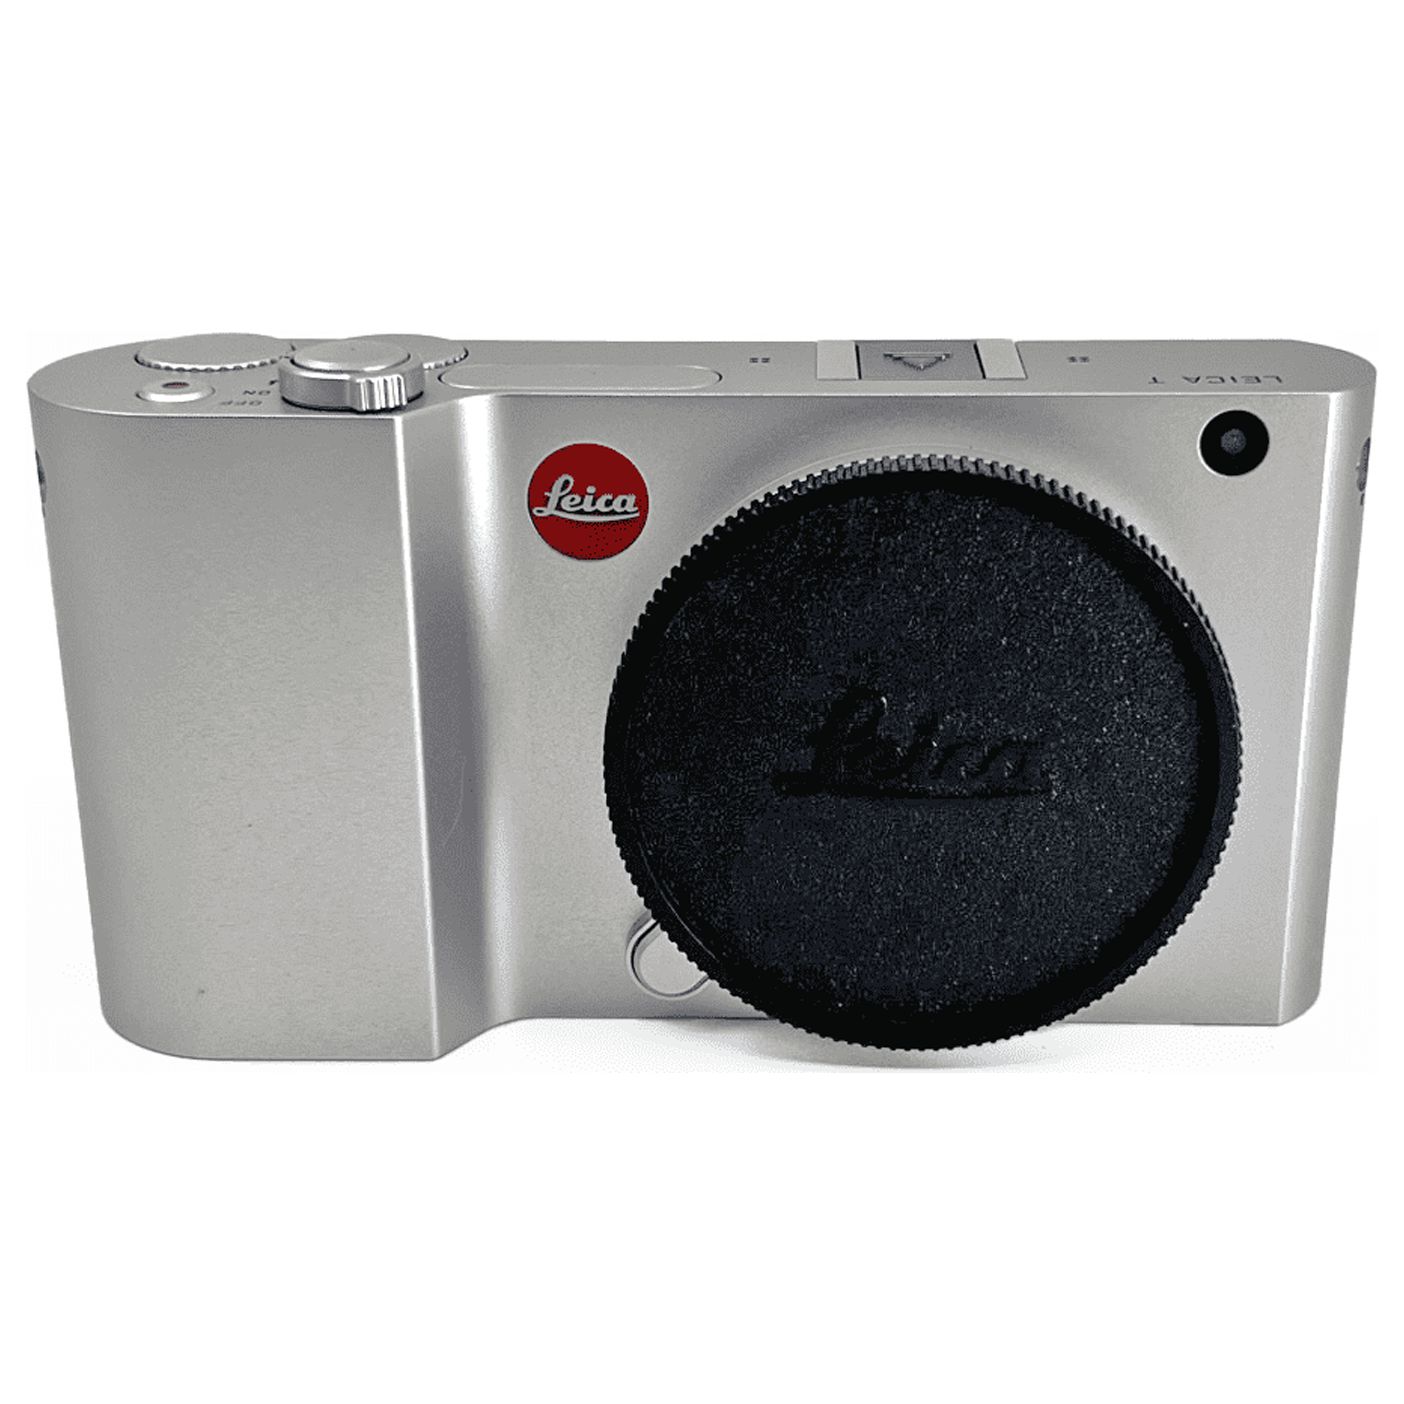 Leica 018-181 T 16 MP Mirrorless Digital Camera with 3.7-Inch LCD Silver, Anodized Aluminum - image 4 of 4